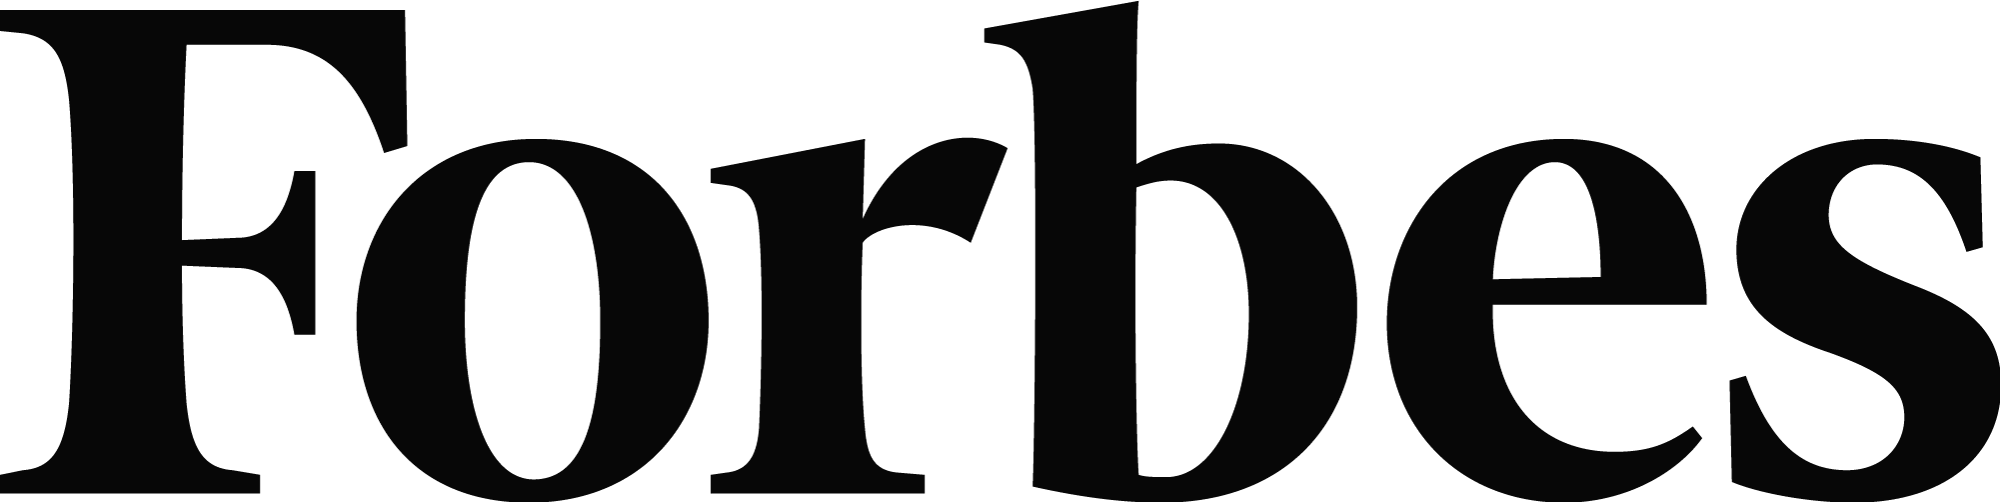 1684047438forbes-logo-png